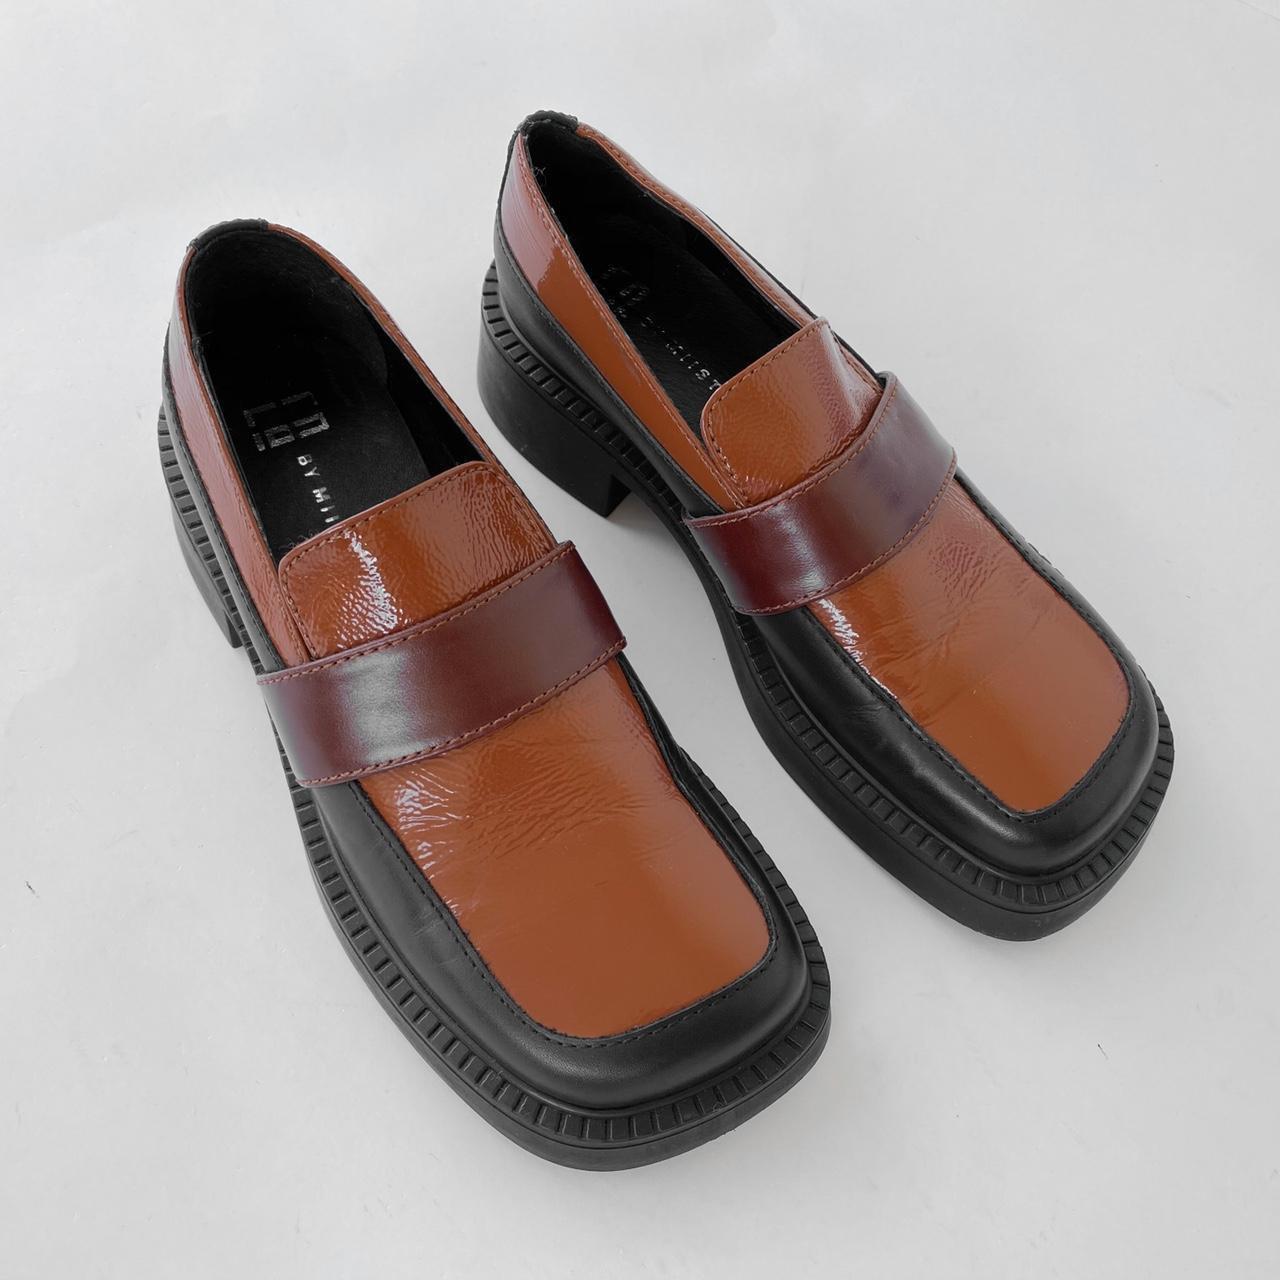 E8 Miista - Brown Leather Square Toe Penny Loafers - Depop